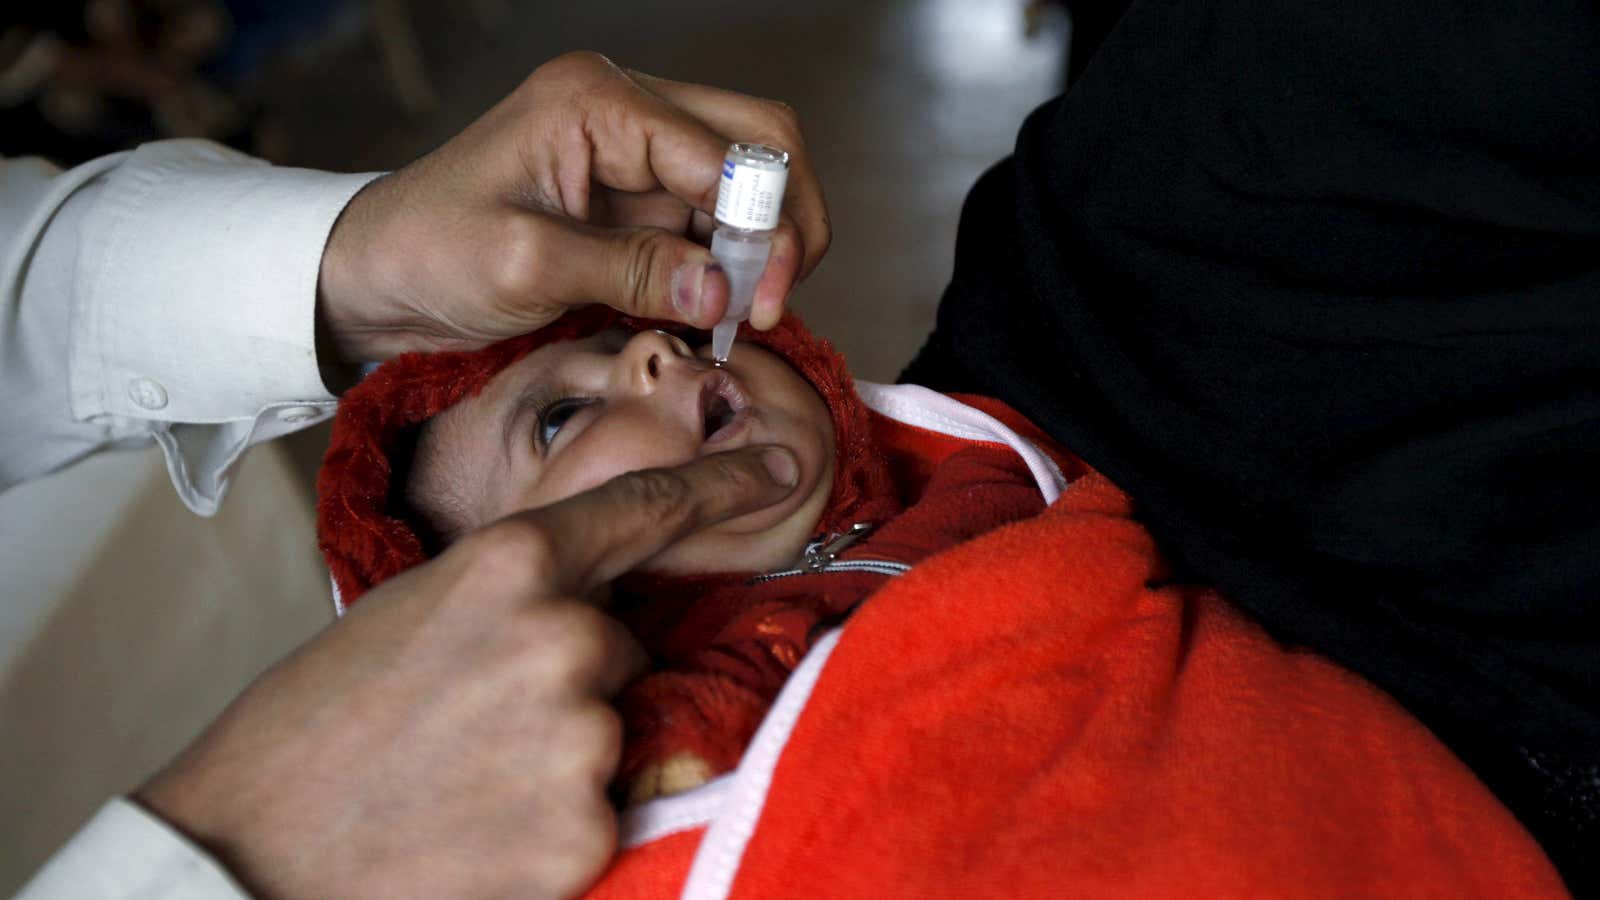 Polio experienced the biggest drop in vaccinations in 2021